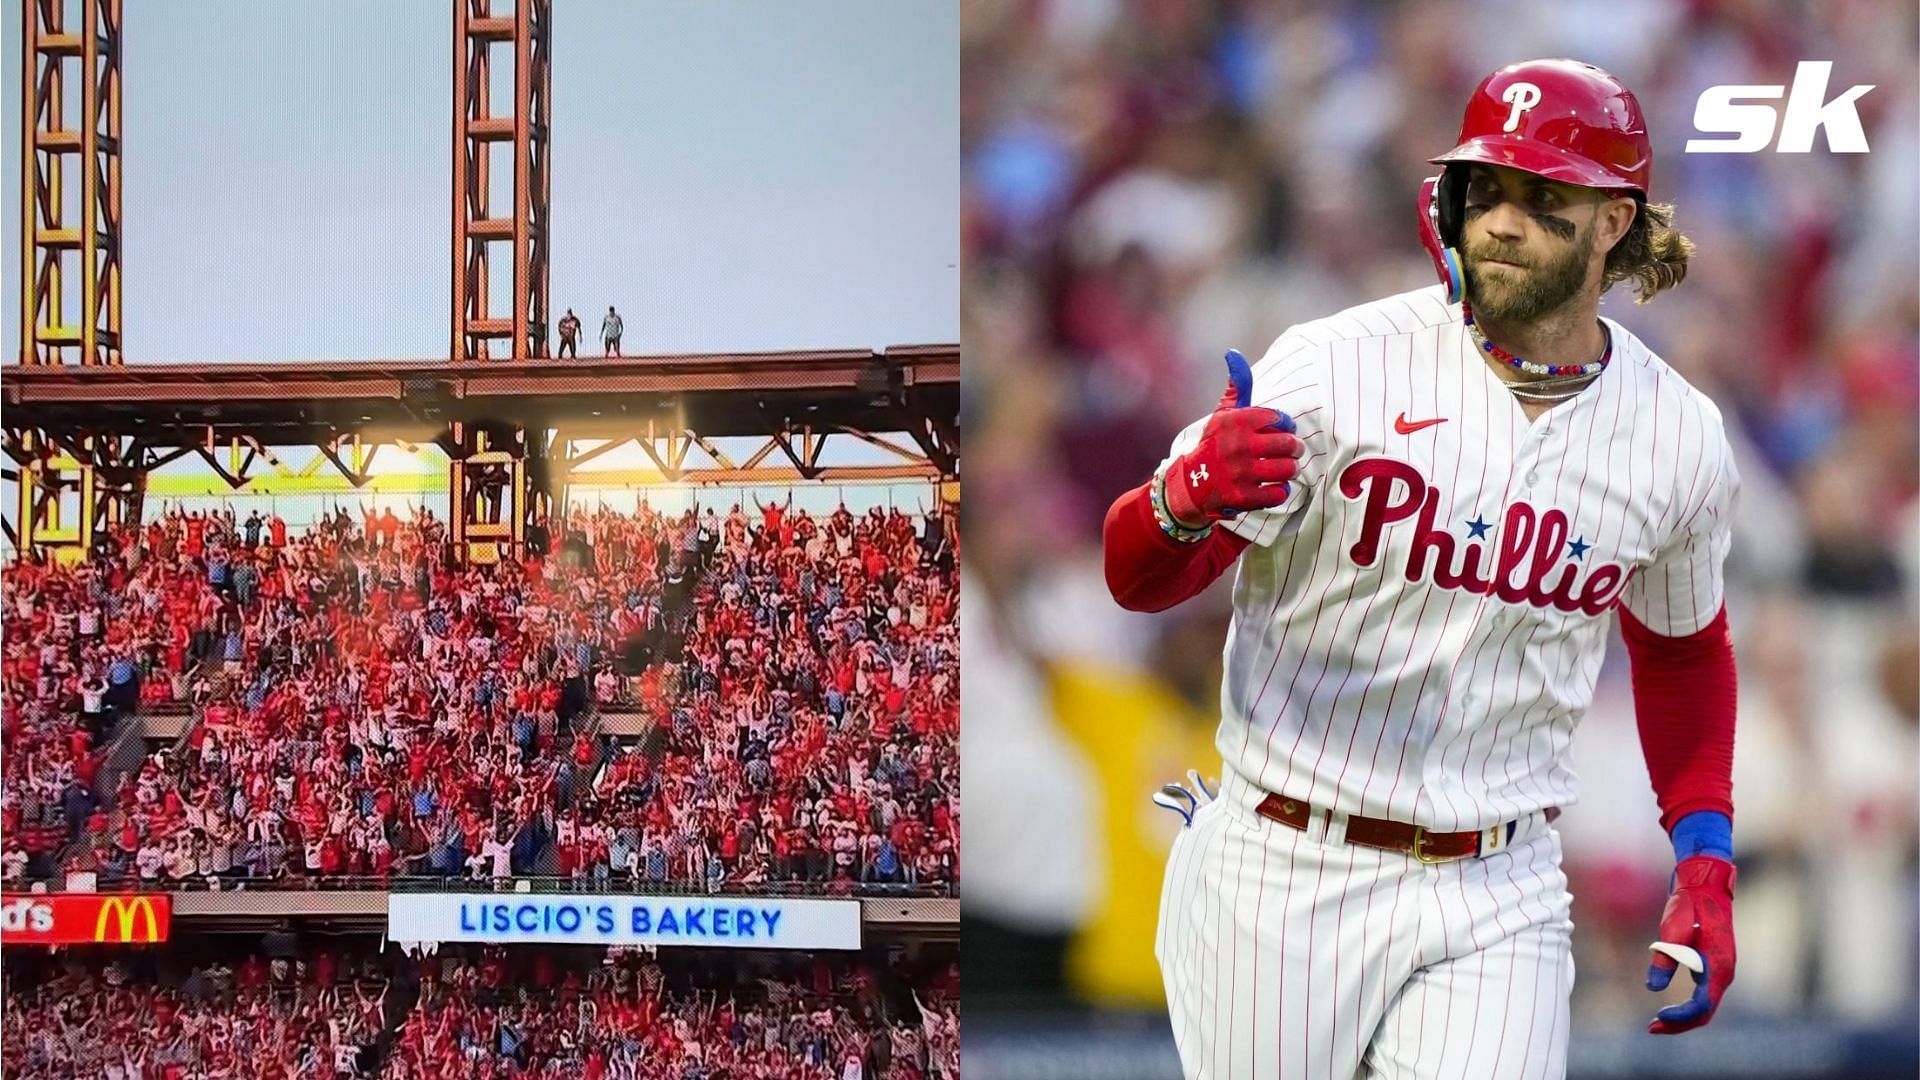 Fans have gone crazy over two people seen standing on the roof of the stadium during the Phildelphia Phillies and Atlanta Braves game